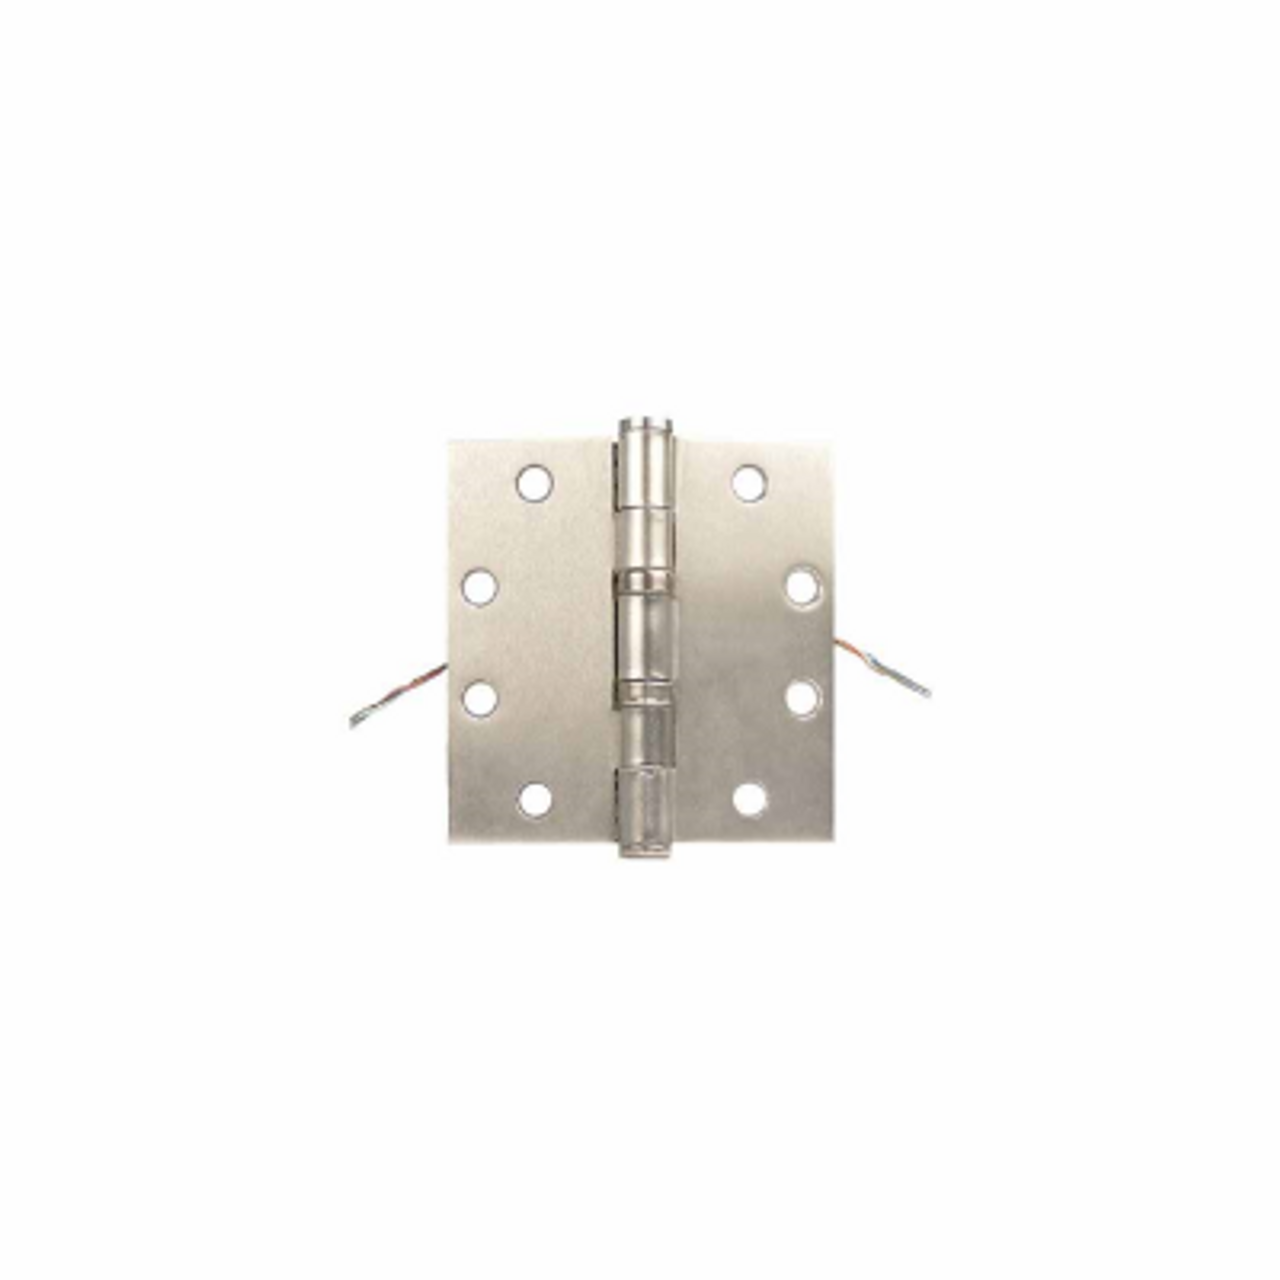 Securitron EH Electrified Hinge, Satin Stainless Steel